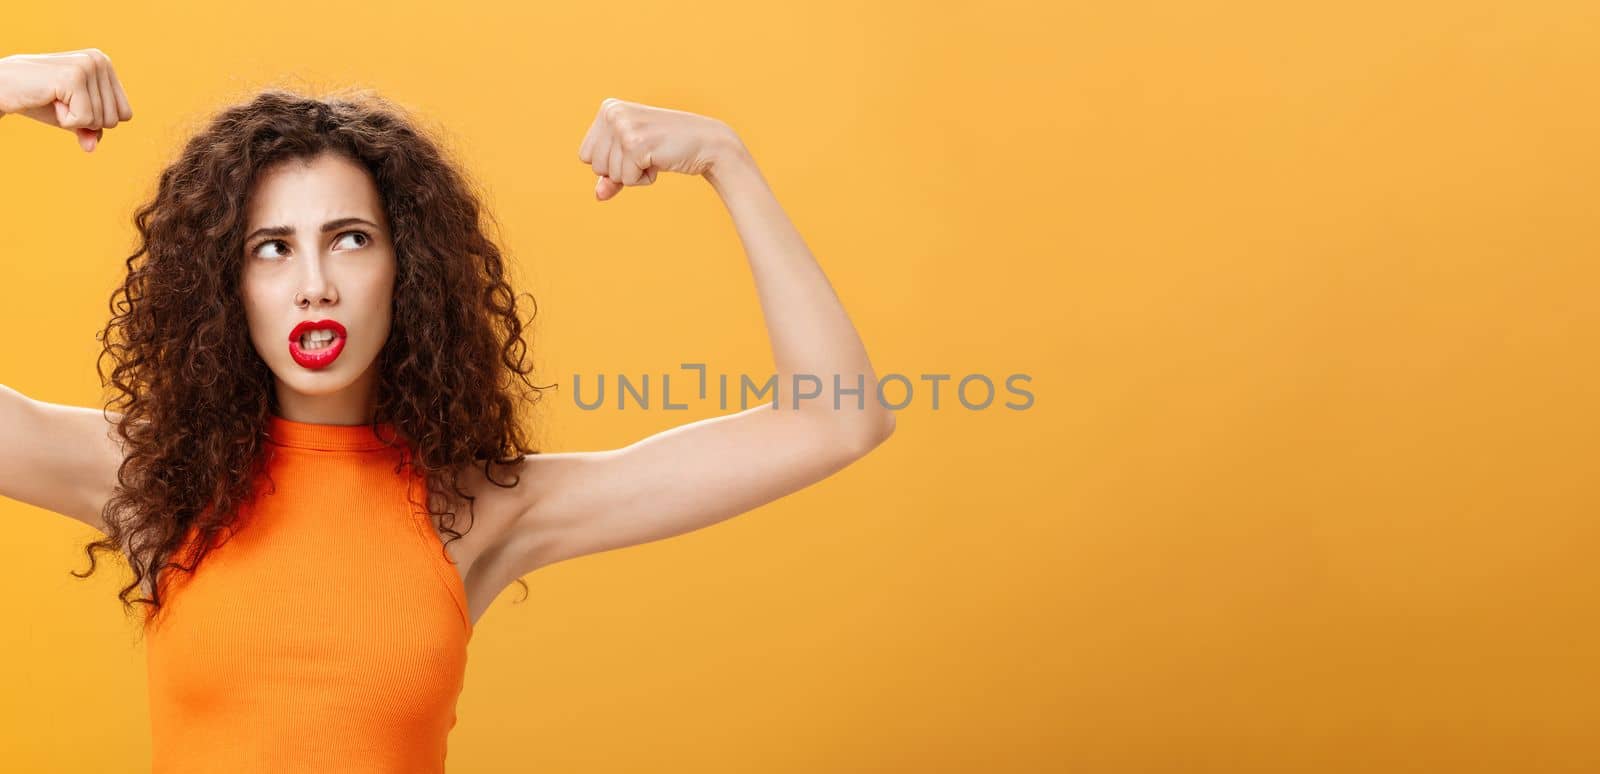 Woman feeling powerful and strong raising hands. with clenched fists making intense face being working out in gym showing muscles and biceps looking at upper right corner posing over orange background.